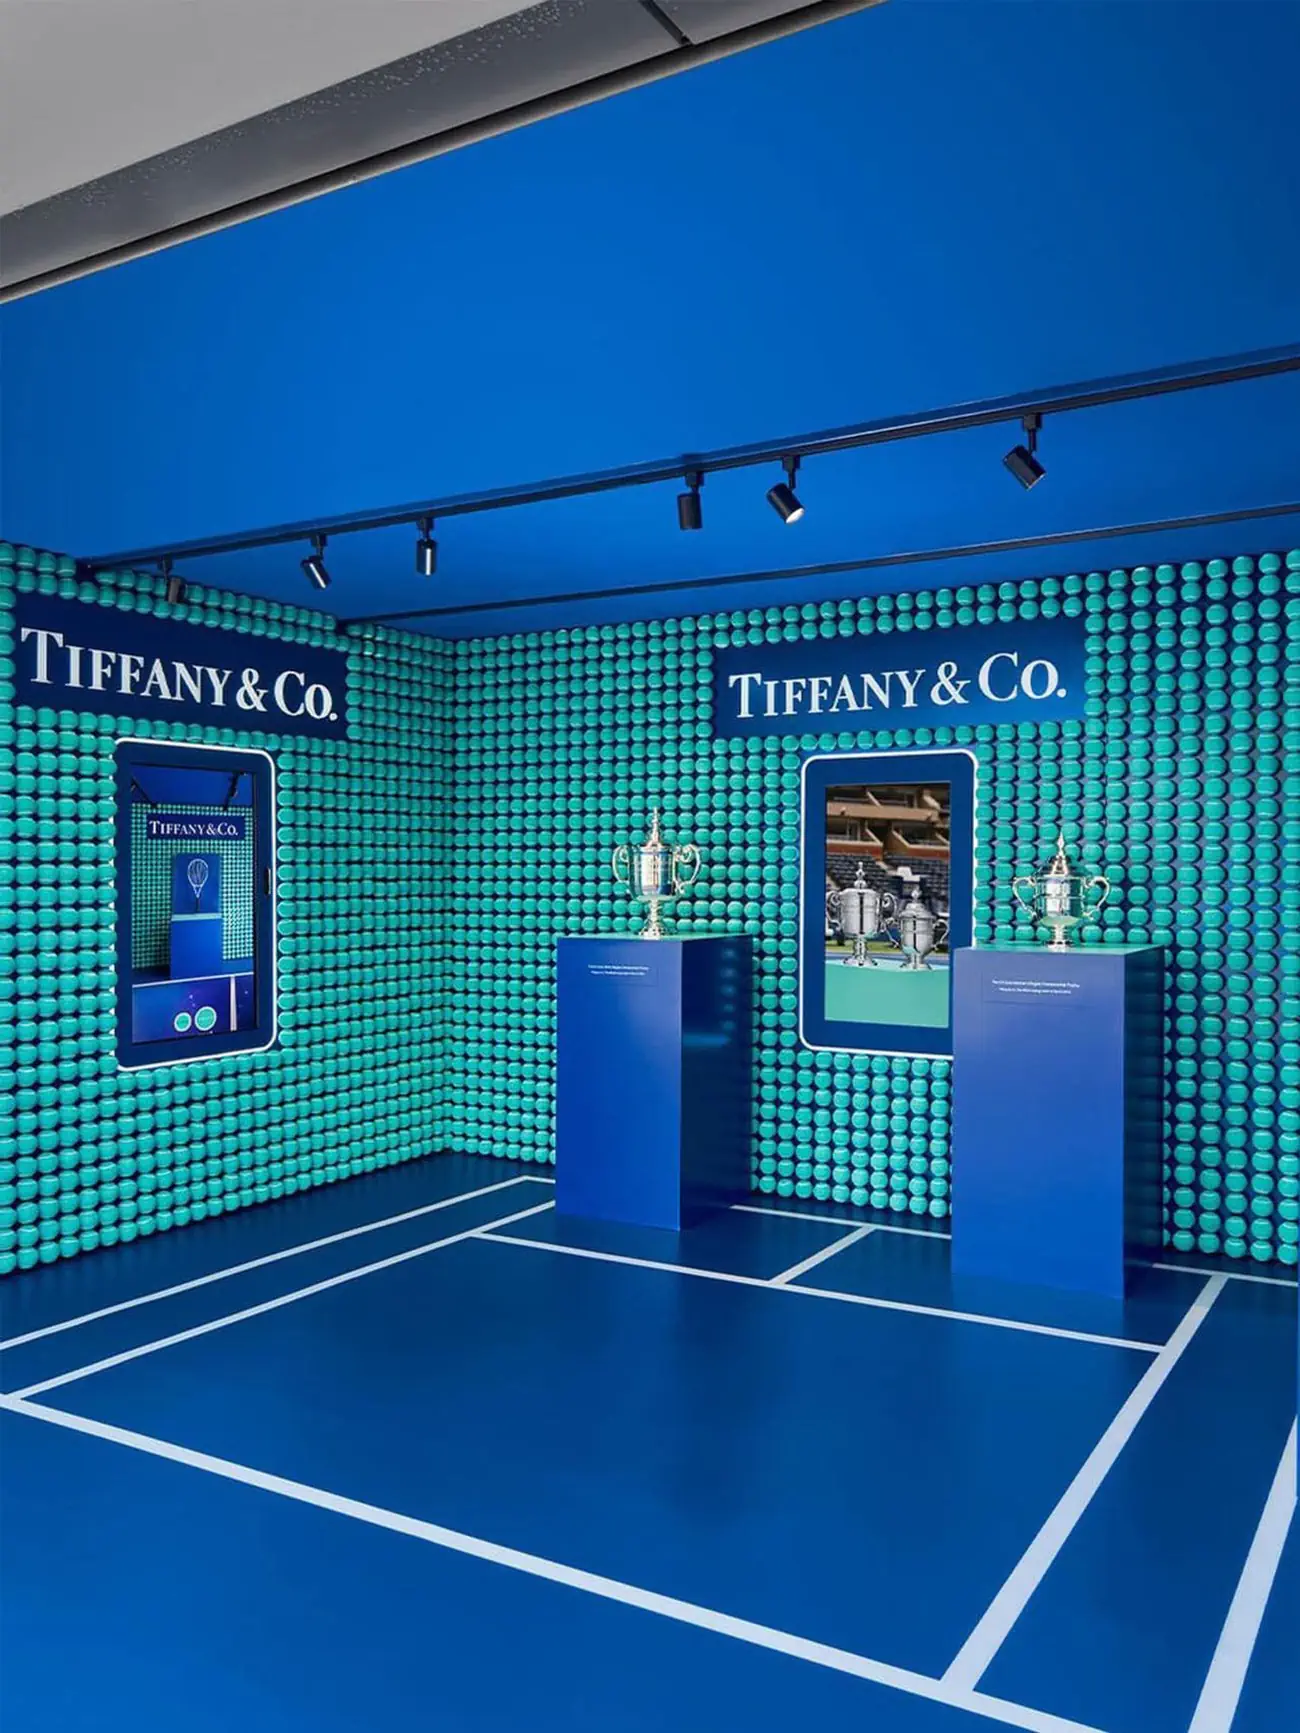 Tiffany & Co. shines brighter at the US Open with Augmented Reality (AR) magic